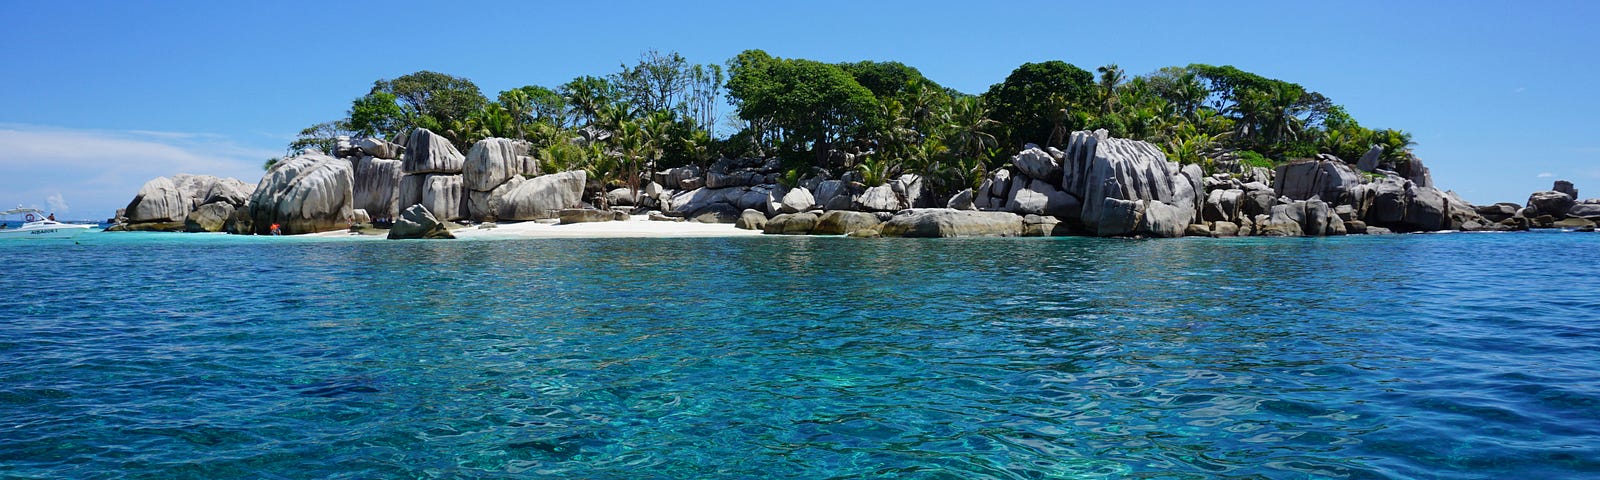 Ile Cocos in the Seychelles. © April Orcutt